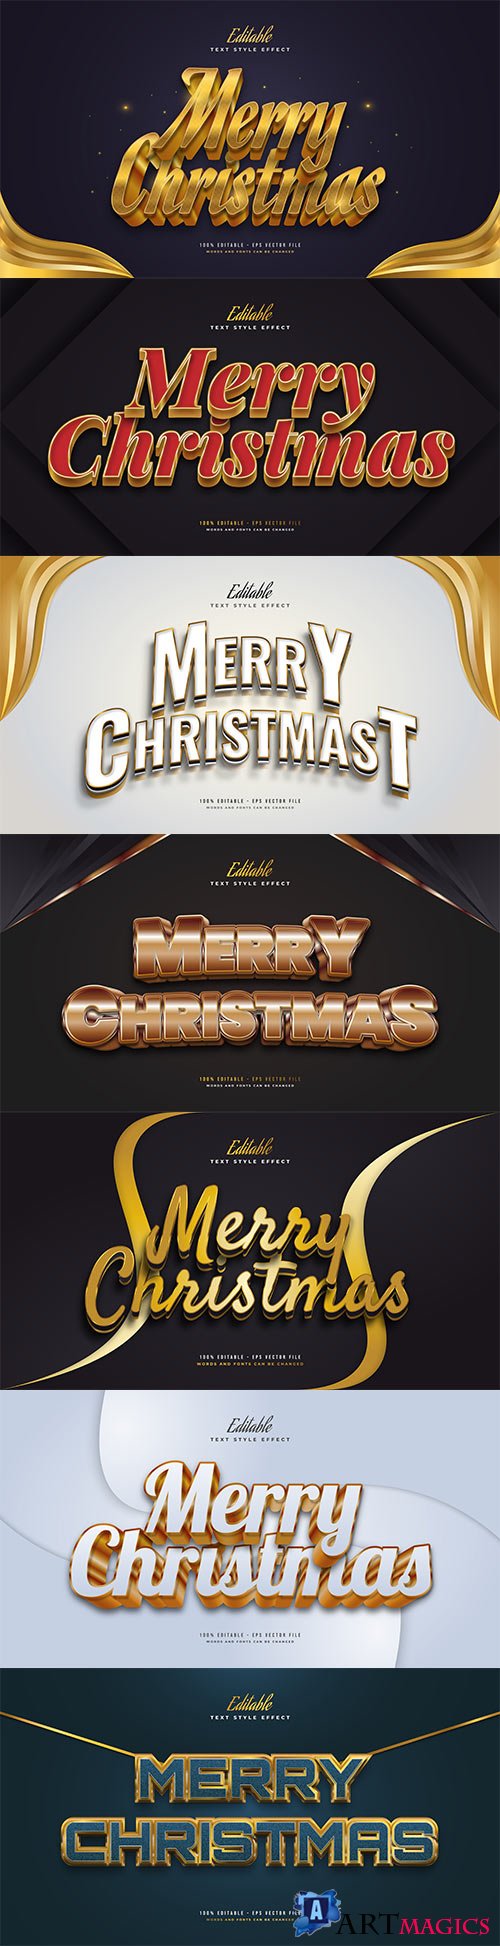 Merry christmas and happy new year 2022 editable vector text effects vol 18